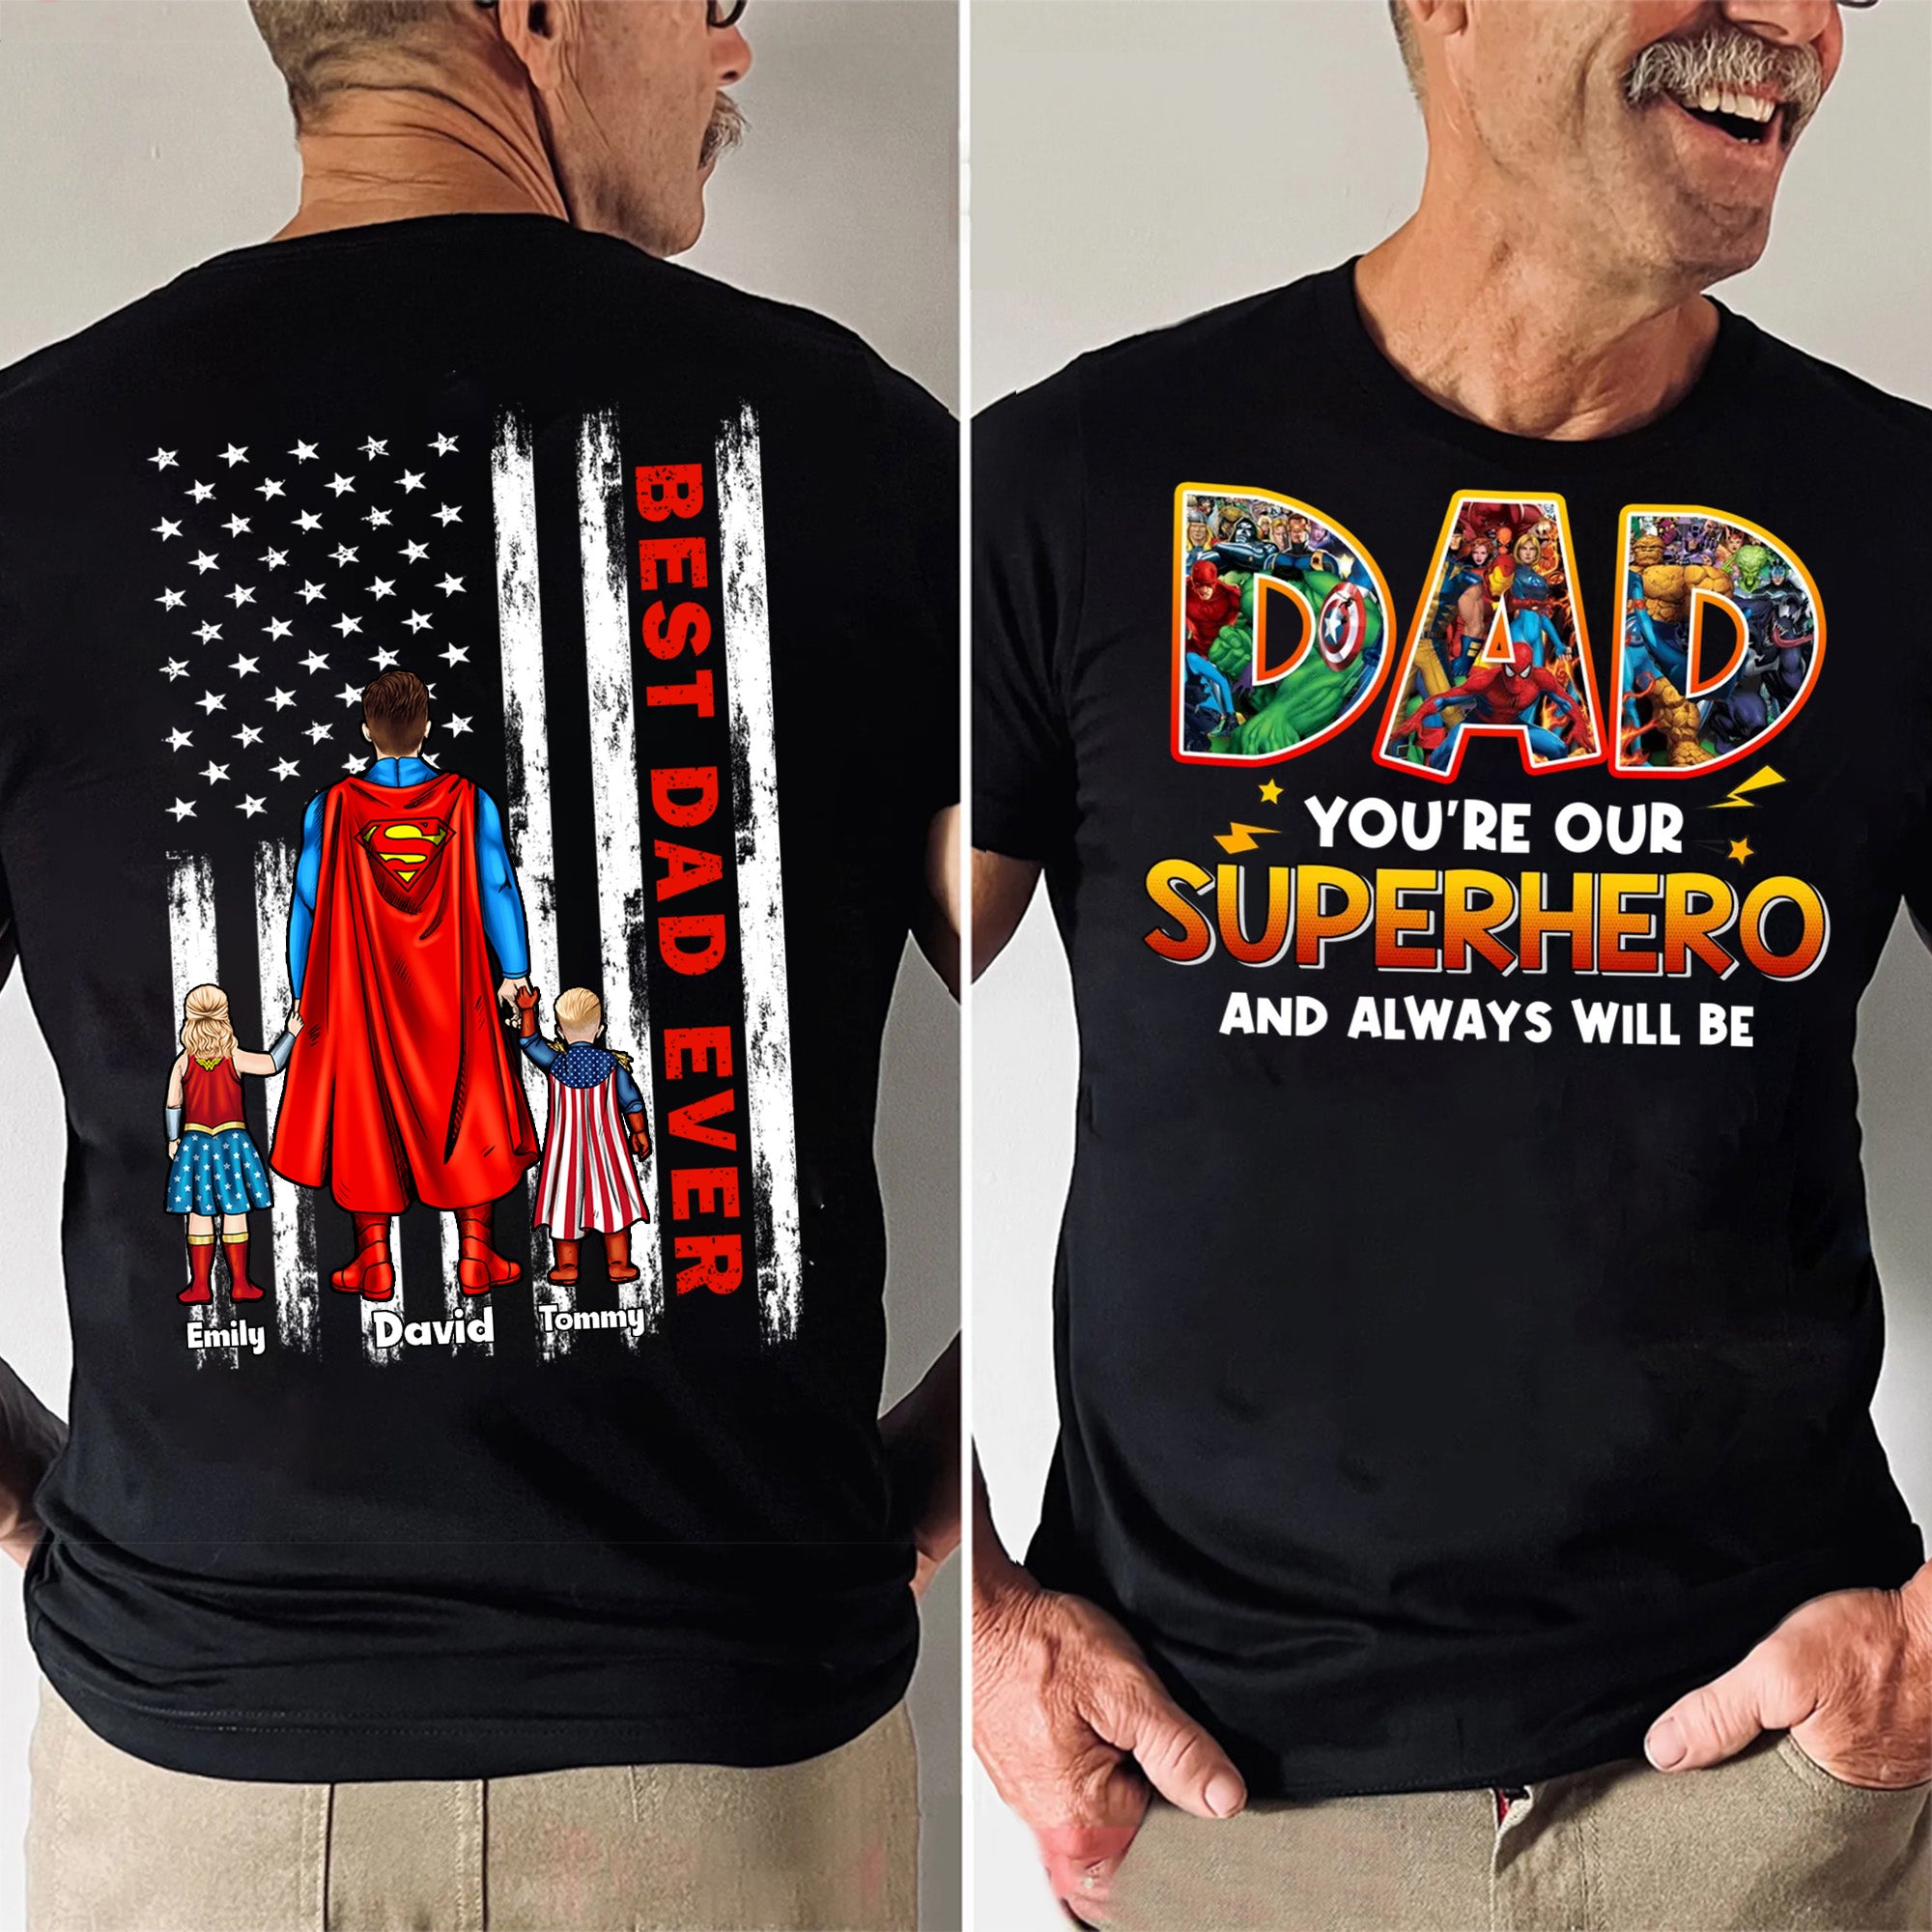 You're Our Superhero And Always Will Be - Gift For Father's Day - Personalized TShirt